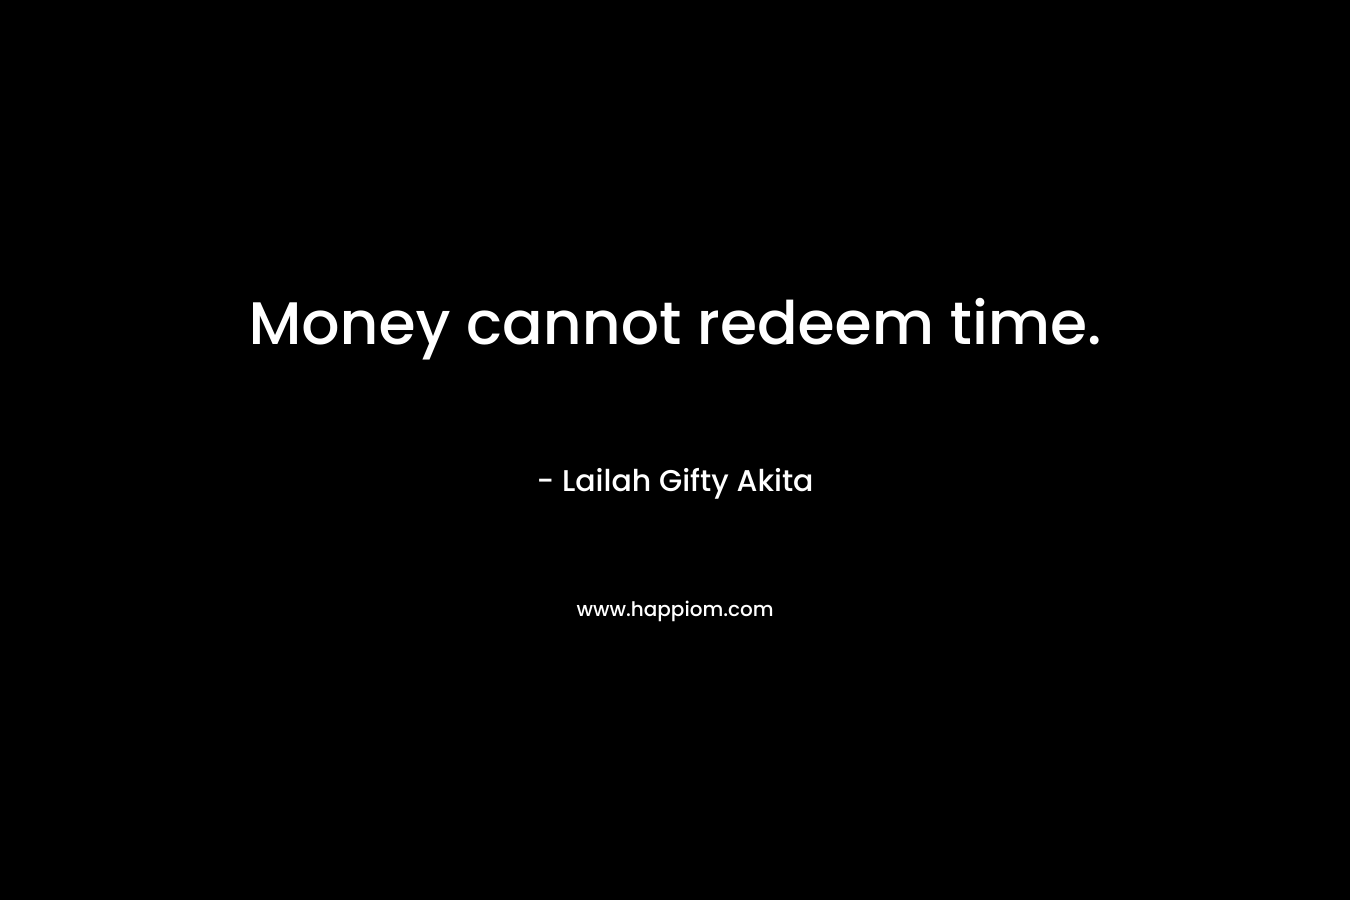 Money cannot redeem time.